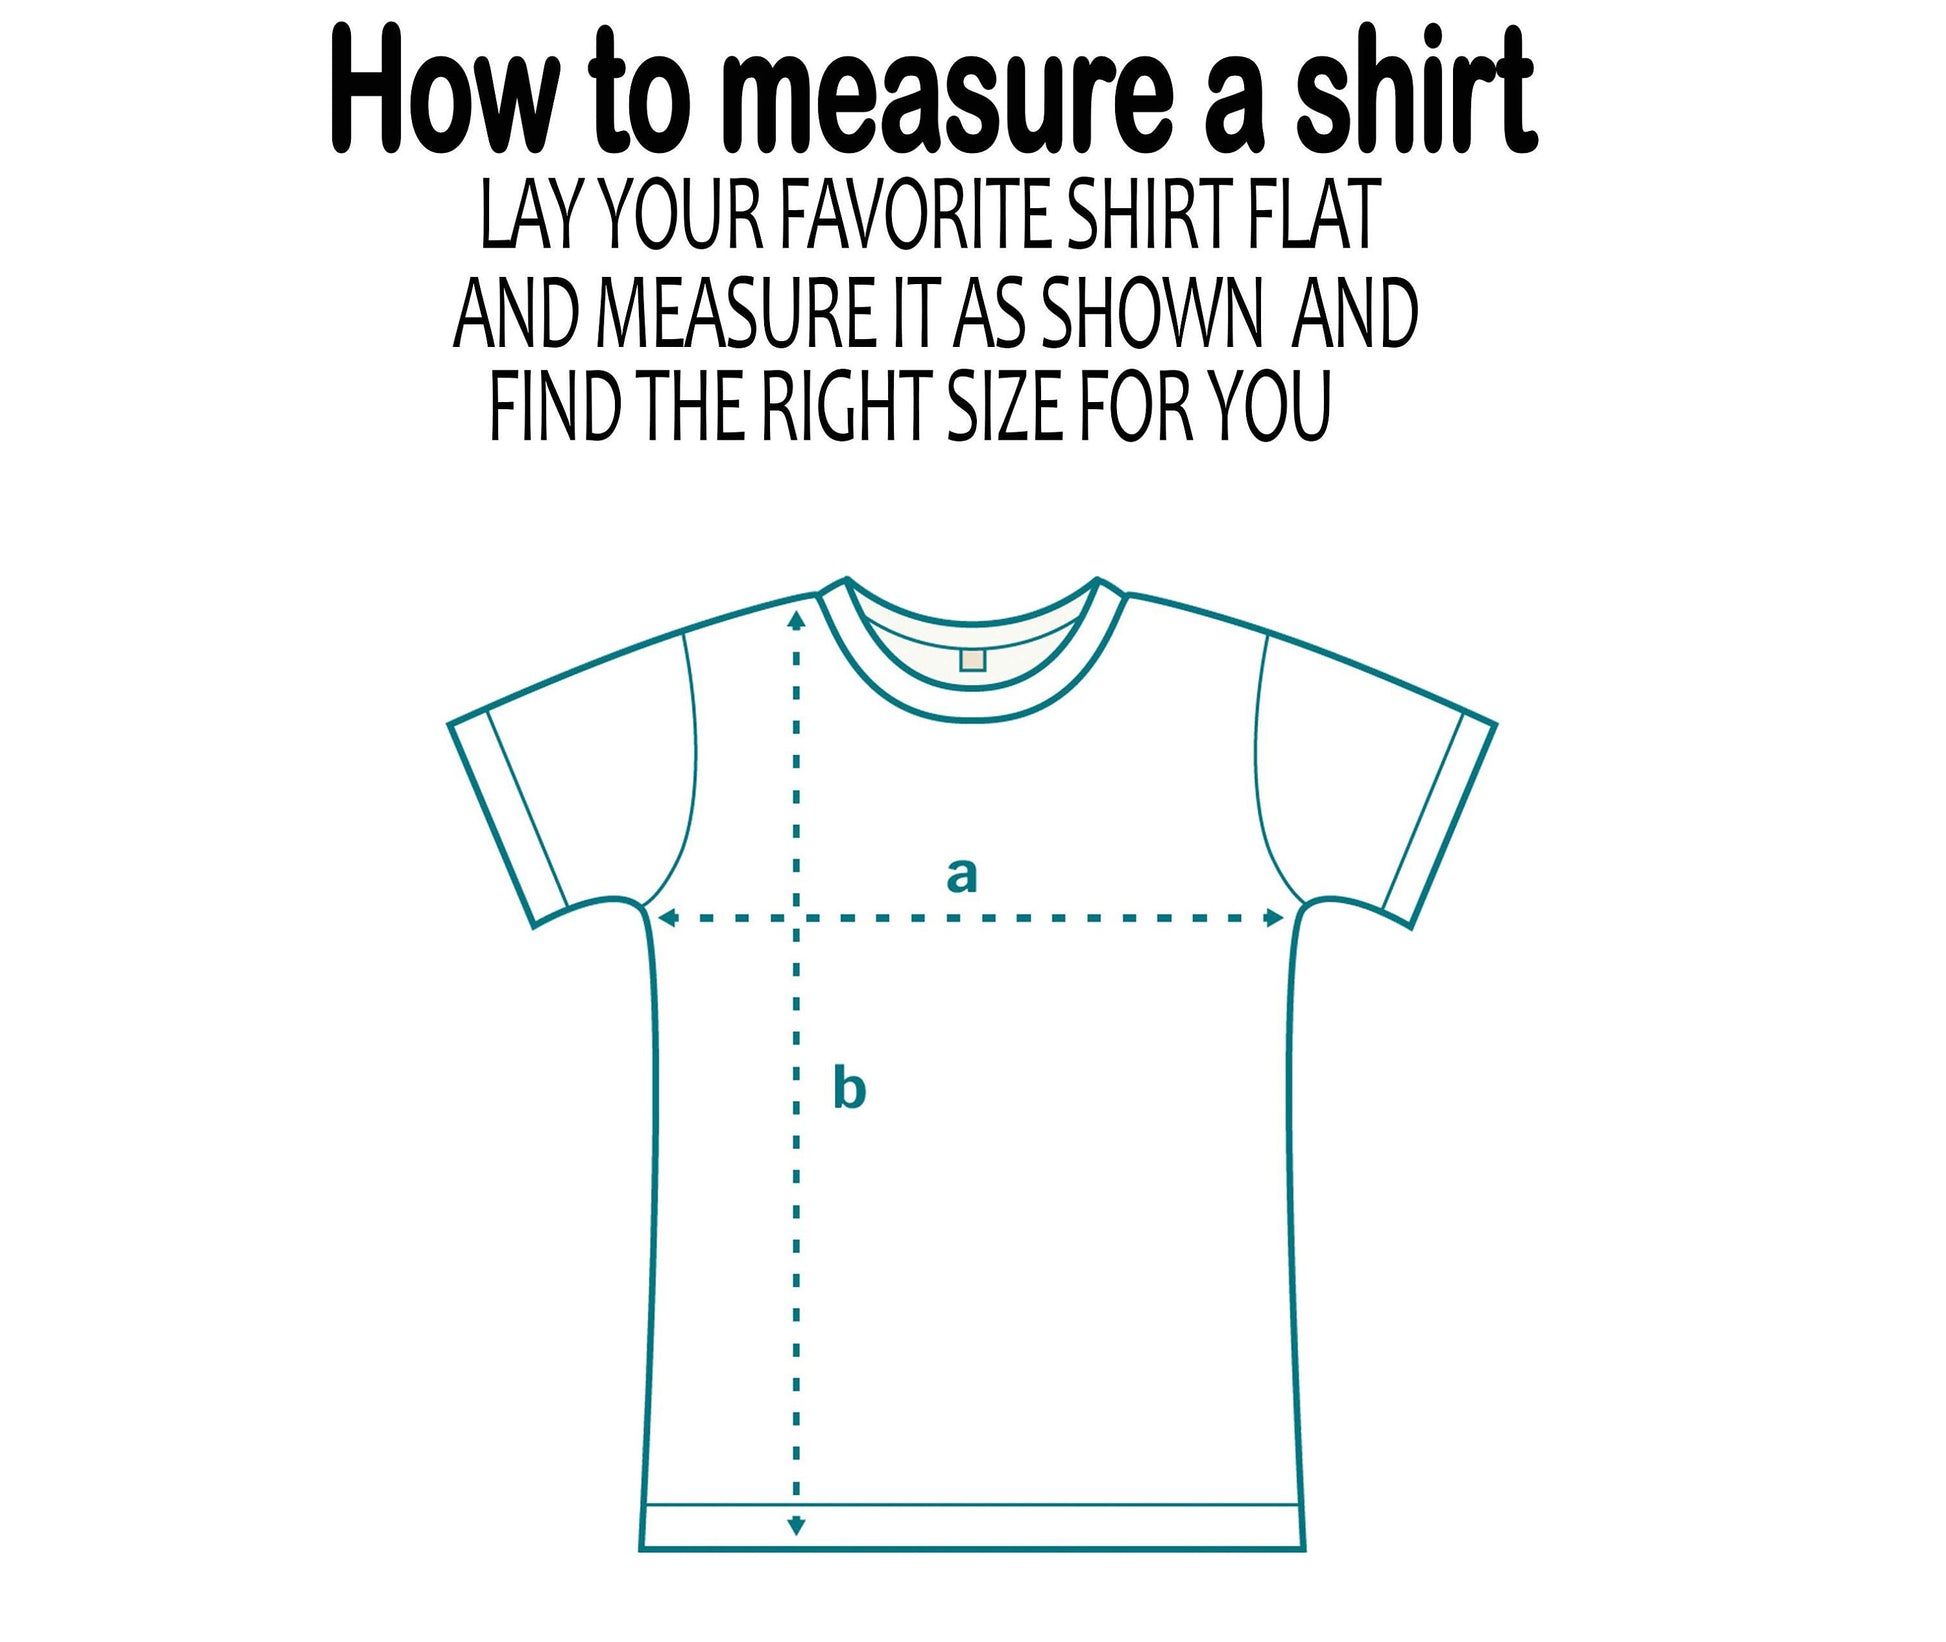 hot to measure a shirt 